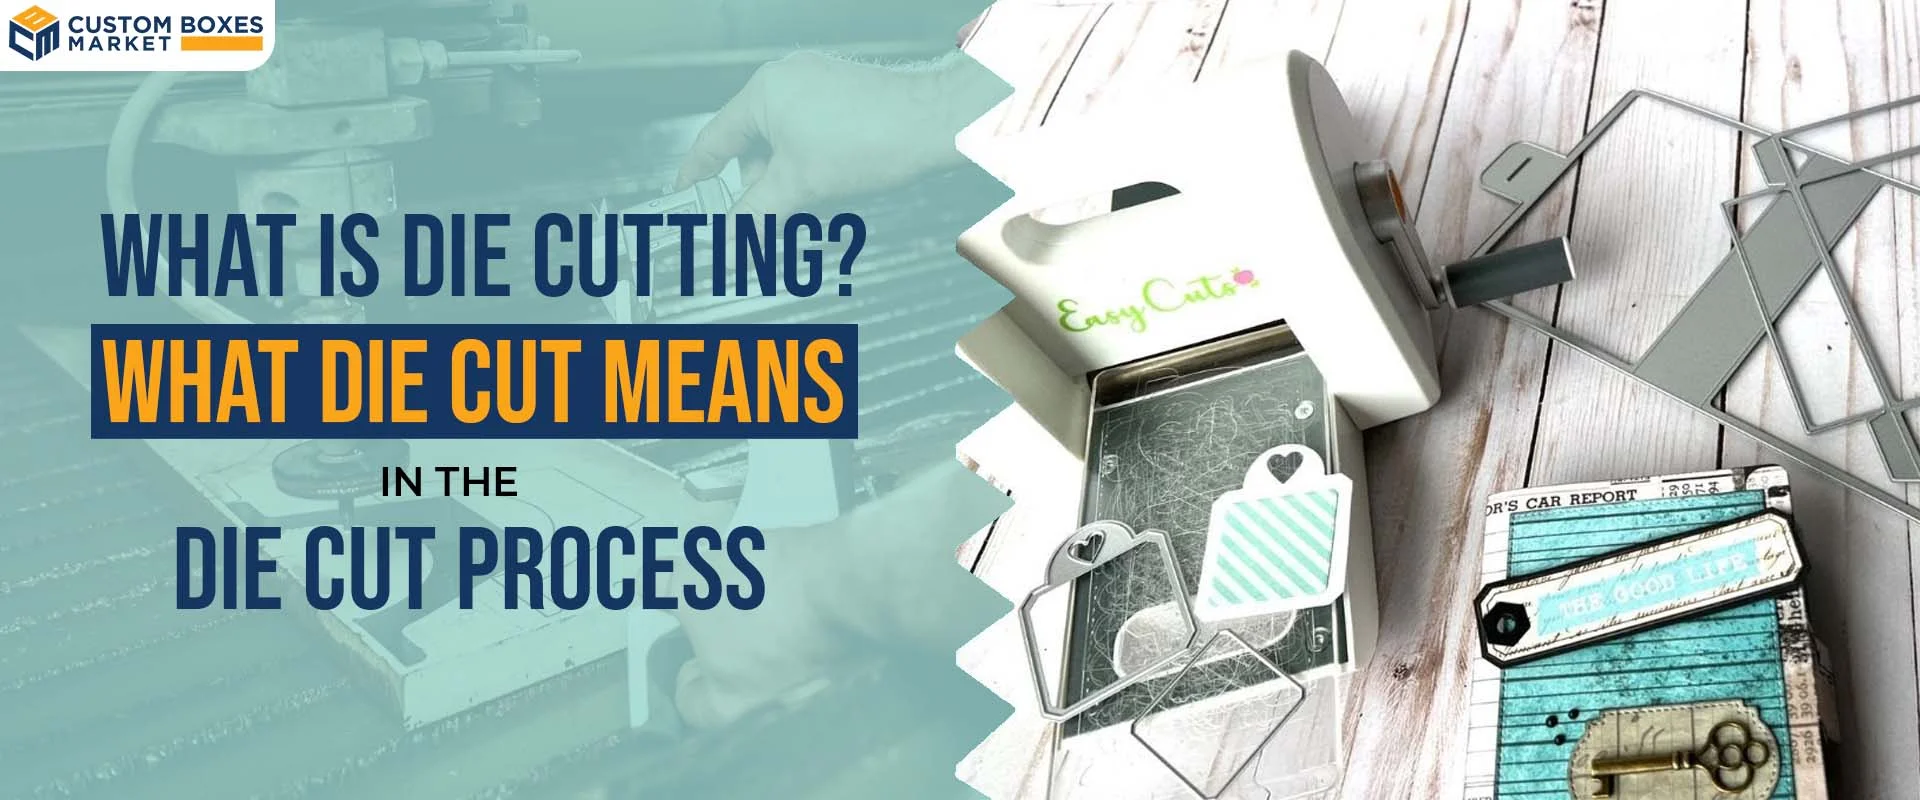 What is Die Cutting? What Does Die Cut Mean in the Die Cutting Process